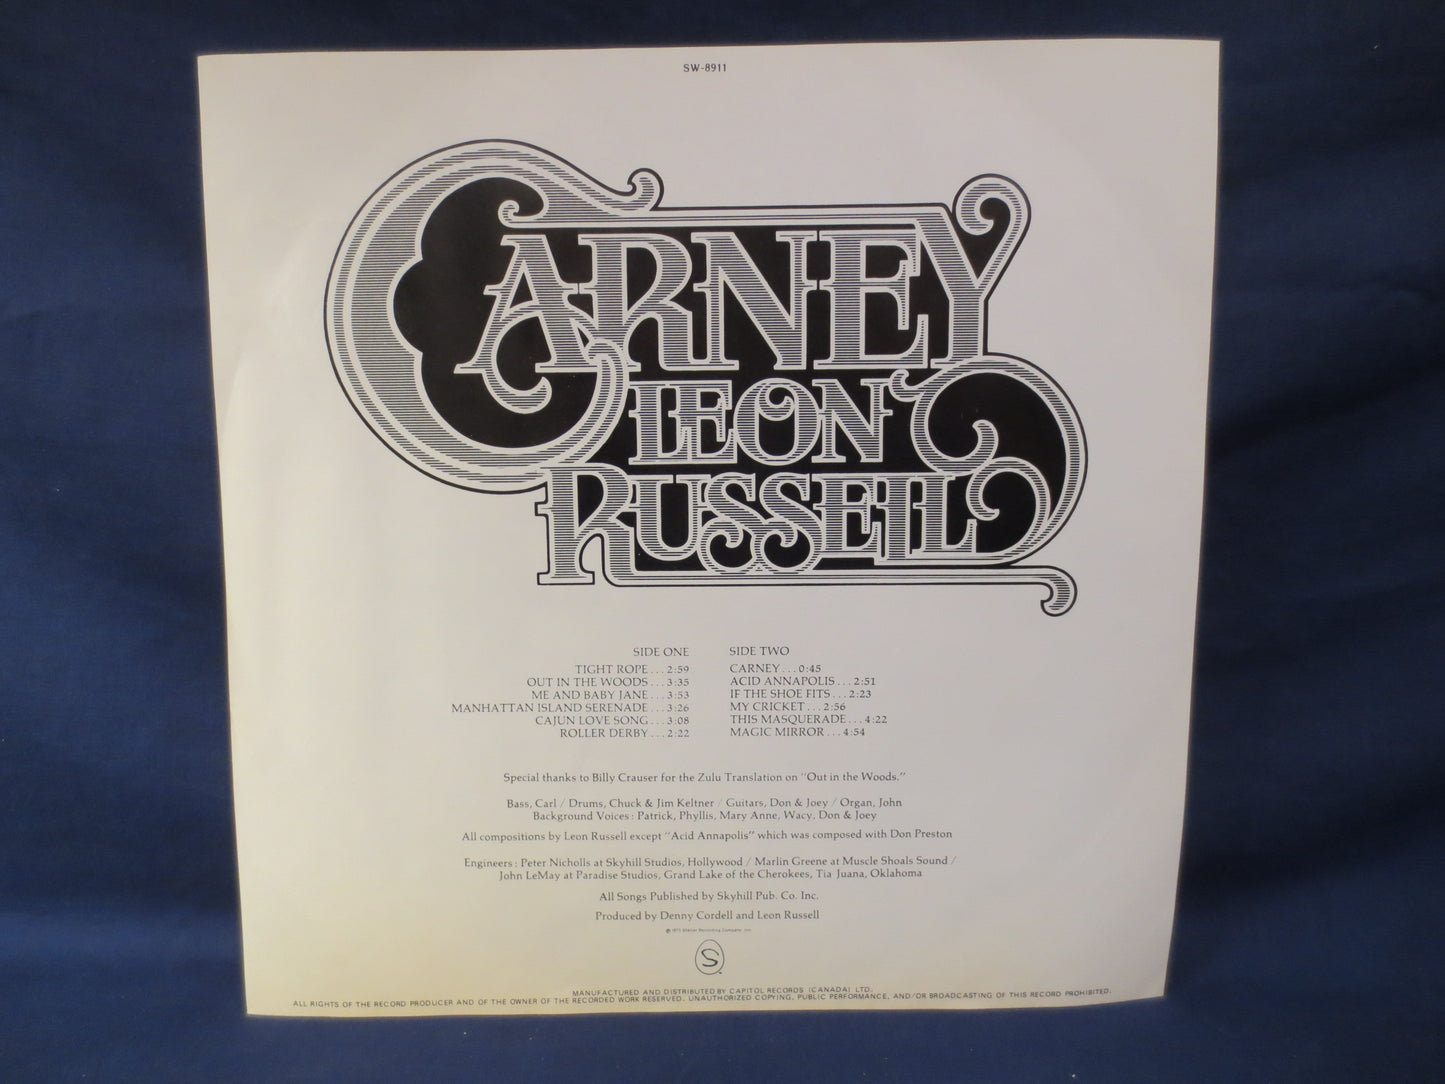 LEON RUSSELL Record, Leon Russell CARNEY, Leon Russell Vinyl, Leon Russell Album, Vintage Vinyl, Vintage Lp, 1972 Records